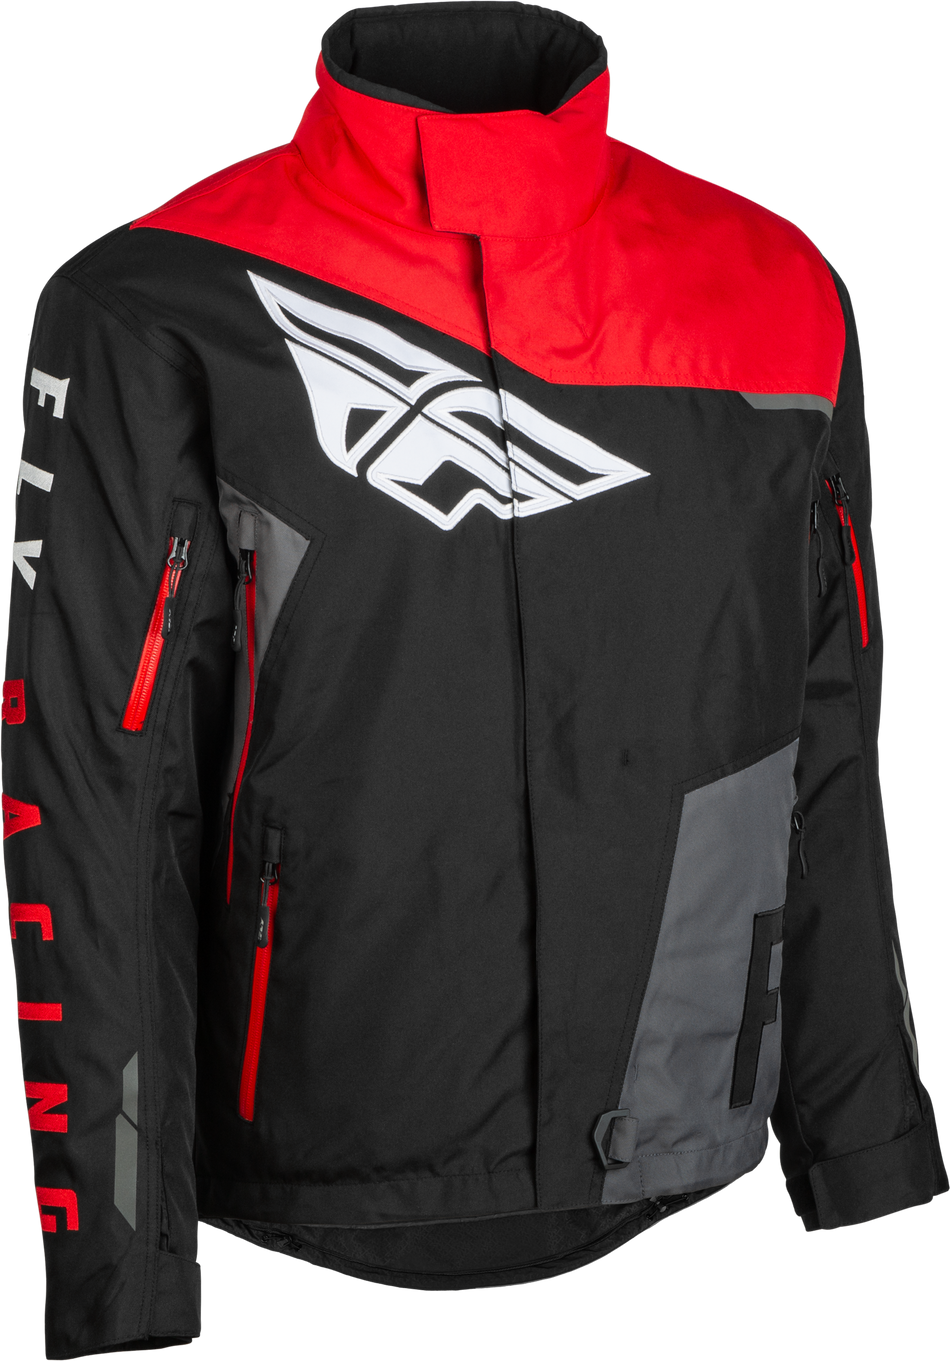 FLY RACING Snx Pro Jacket Black/Grey/Red Sm 470-4117S